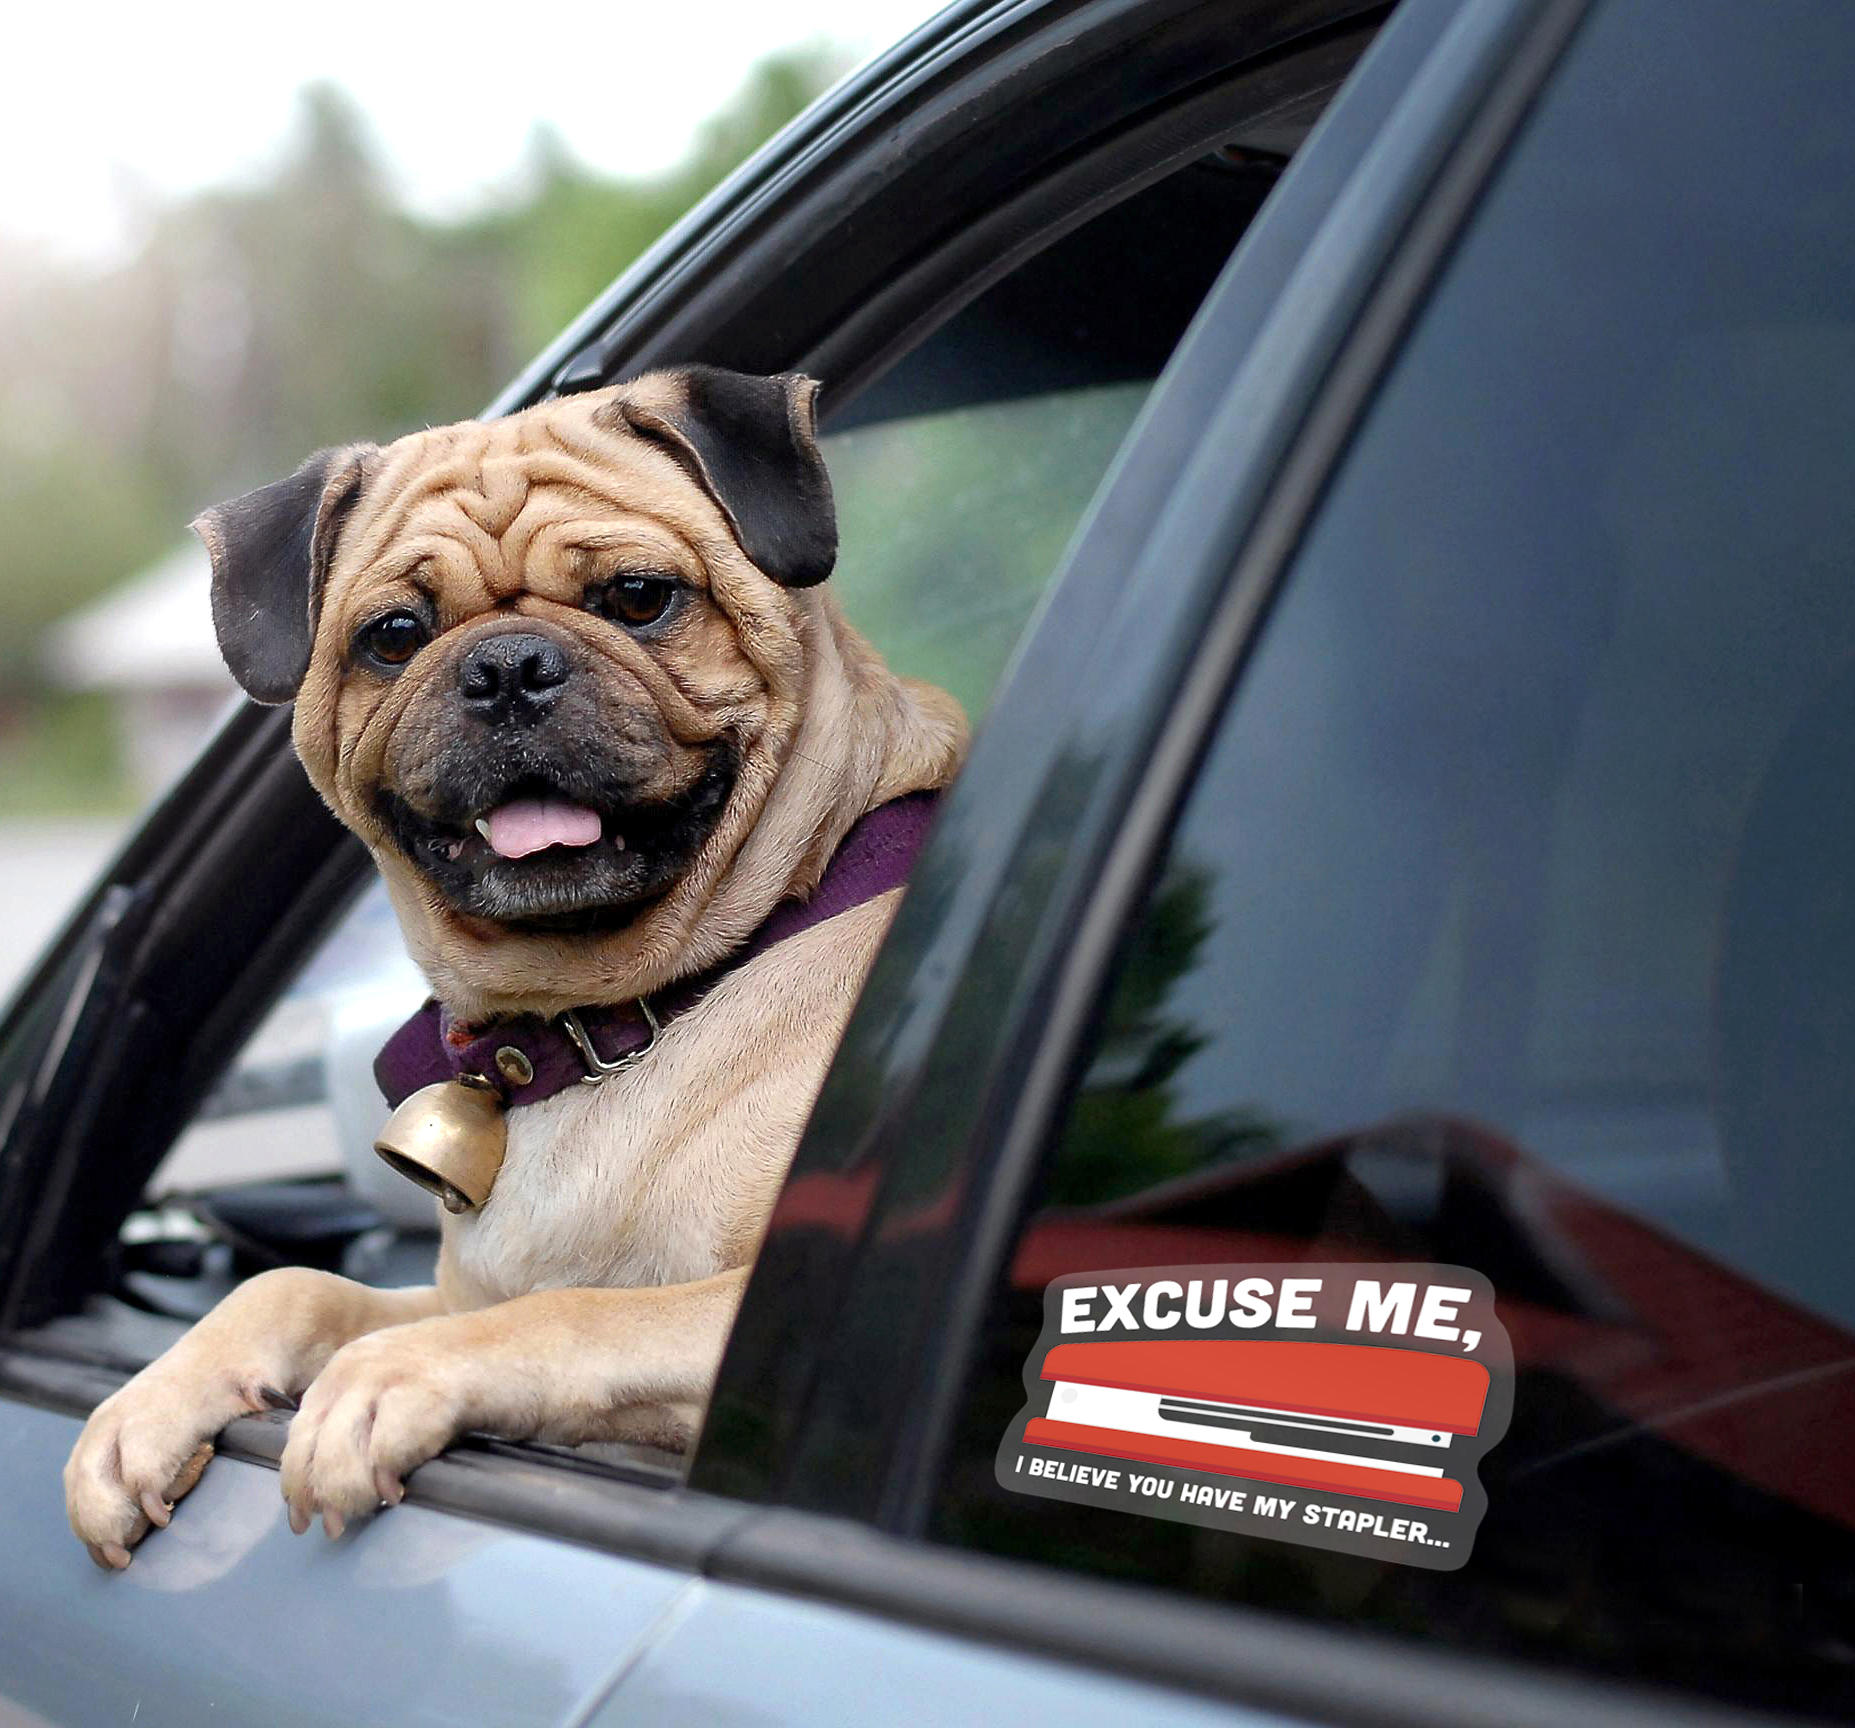 dog looking out of a car and a "Excuse Me" car window sticker